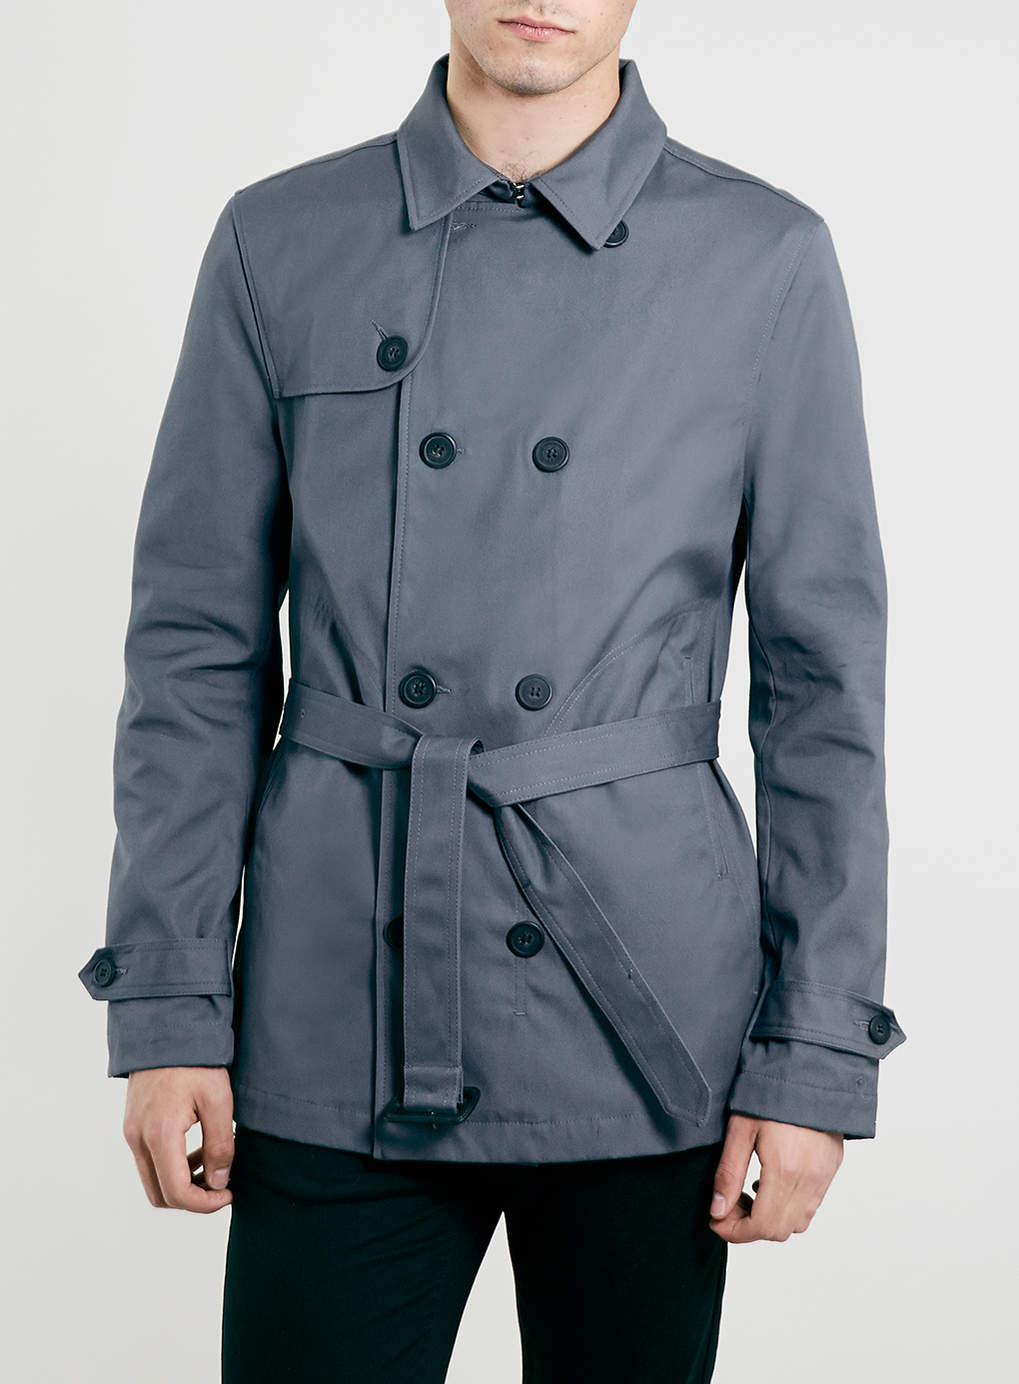 Topman Grey Cropped Trench Coat in Gray for Men (Grey) | Lyst